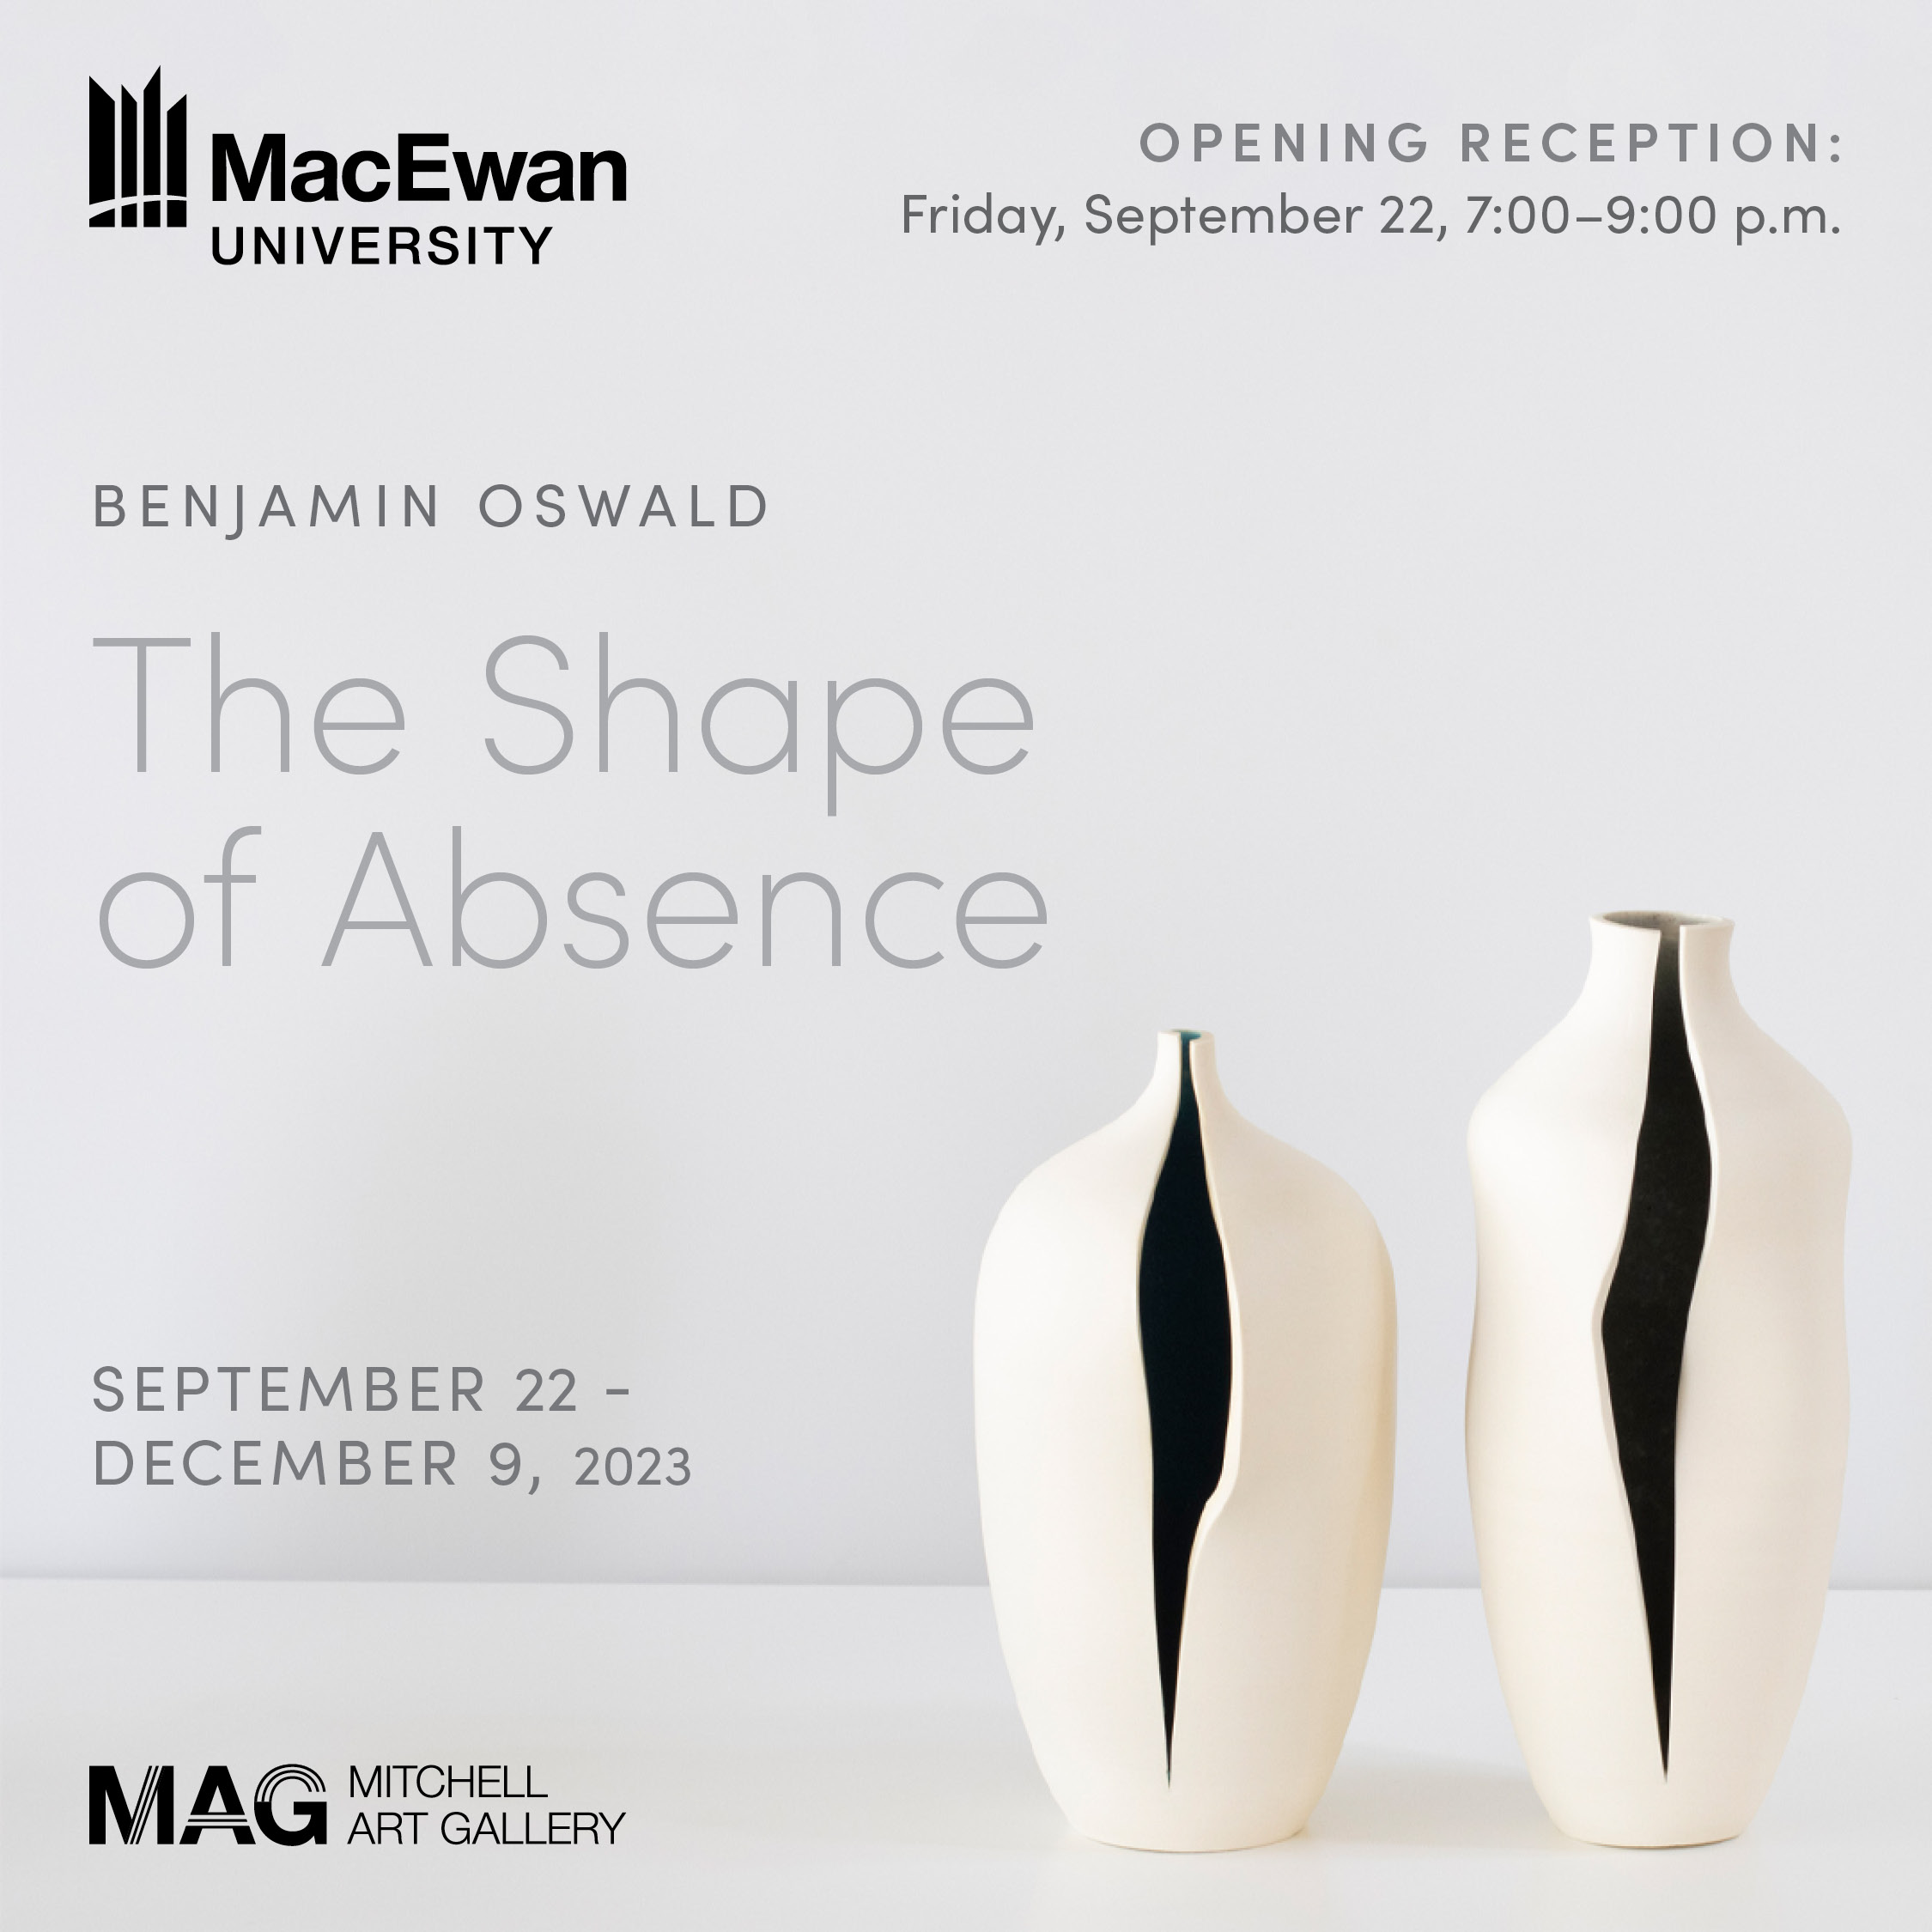 Opening Reception - Benjamin Oswald: The Shape of Absence